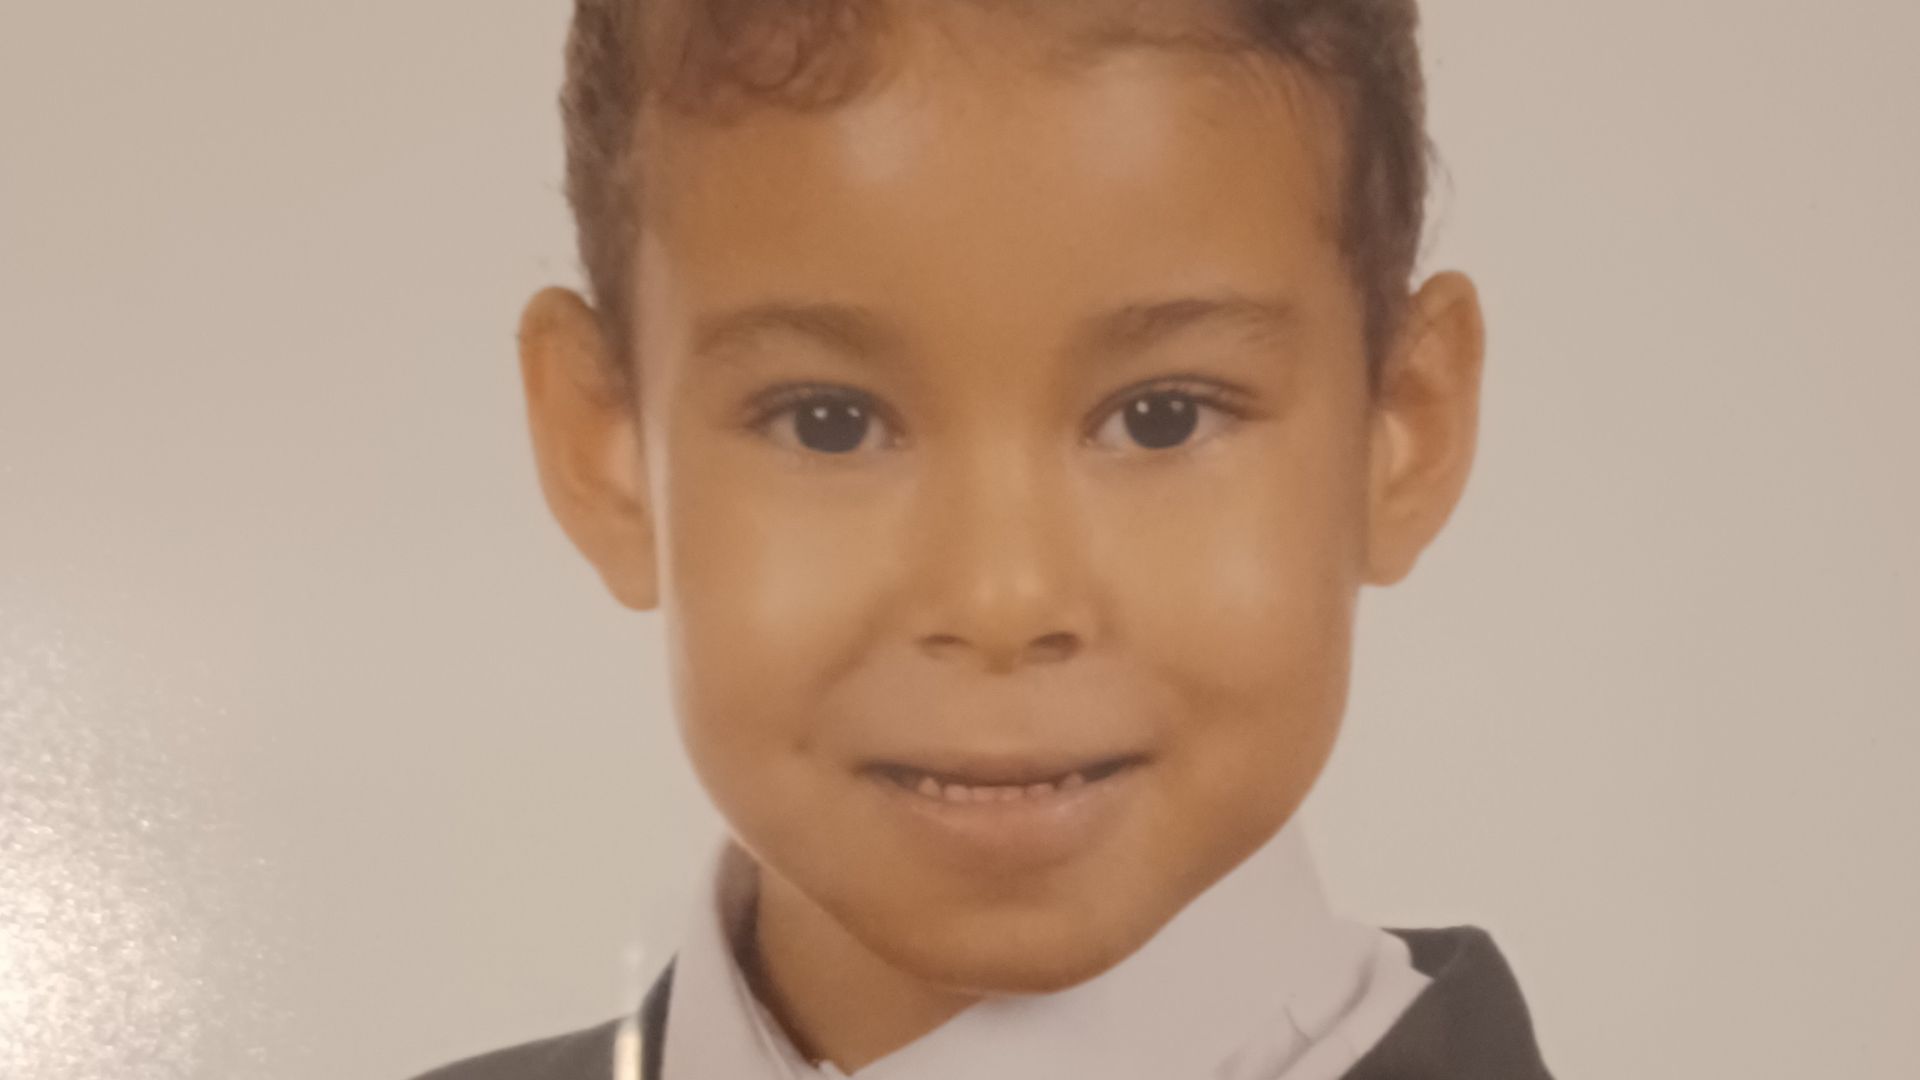 'Extreme concern' for missing six-year-old girl